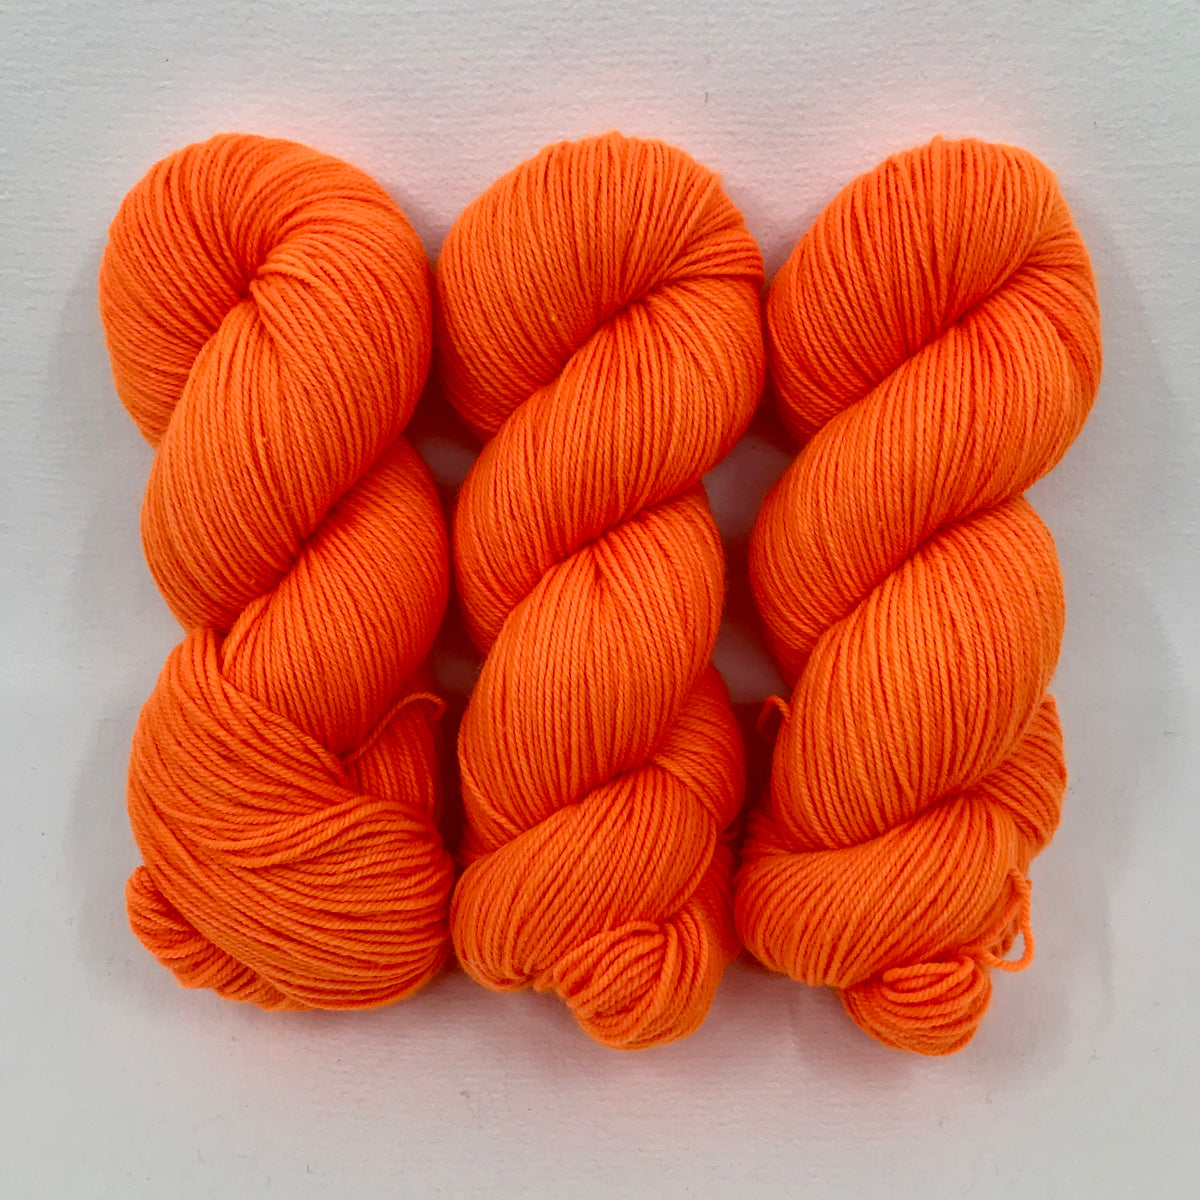 Orange Light Sabre in Worsted Weight